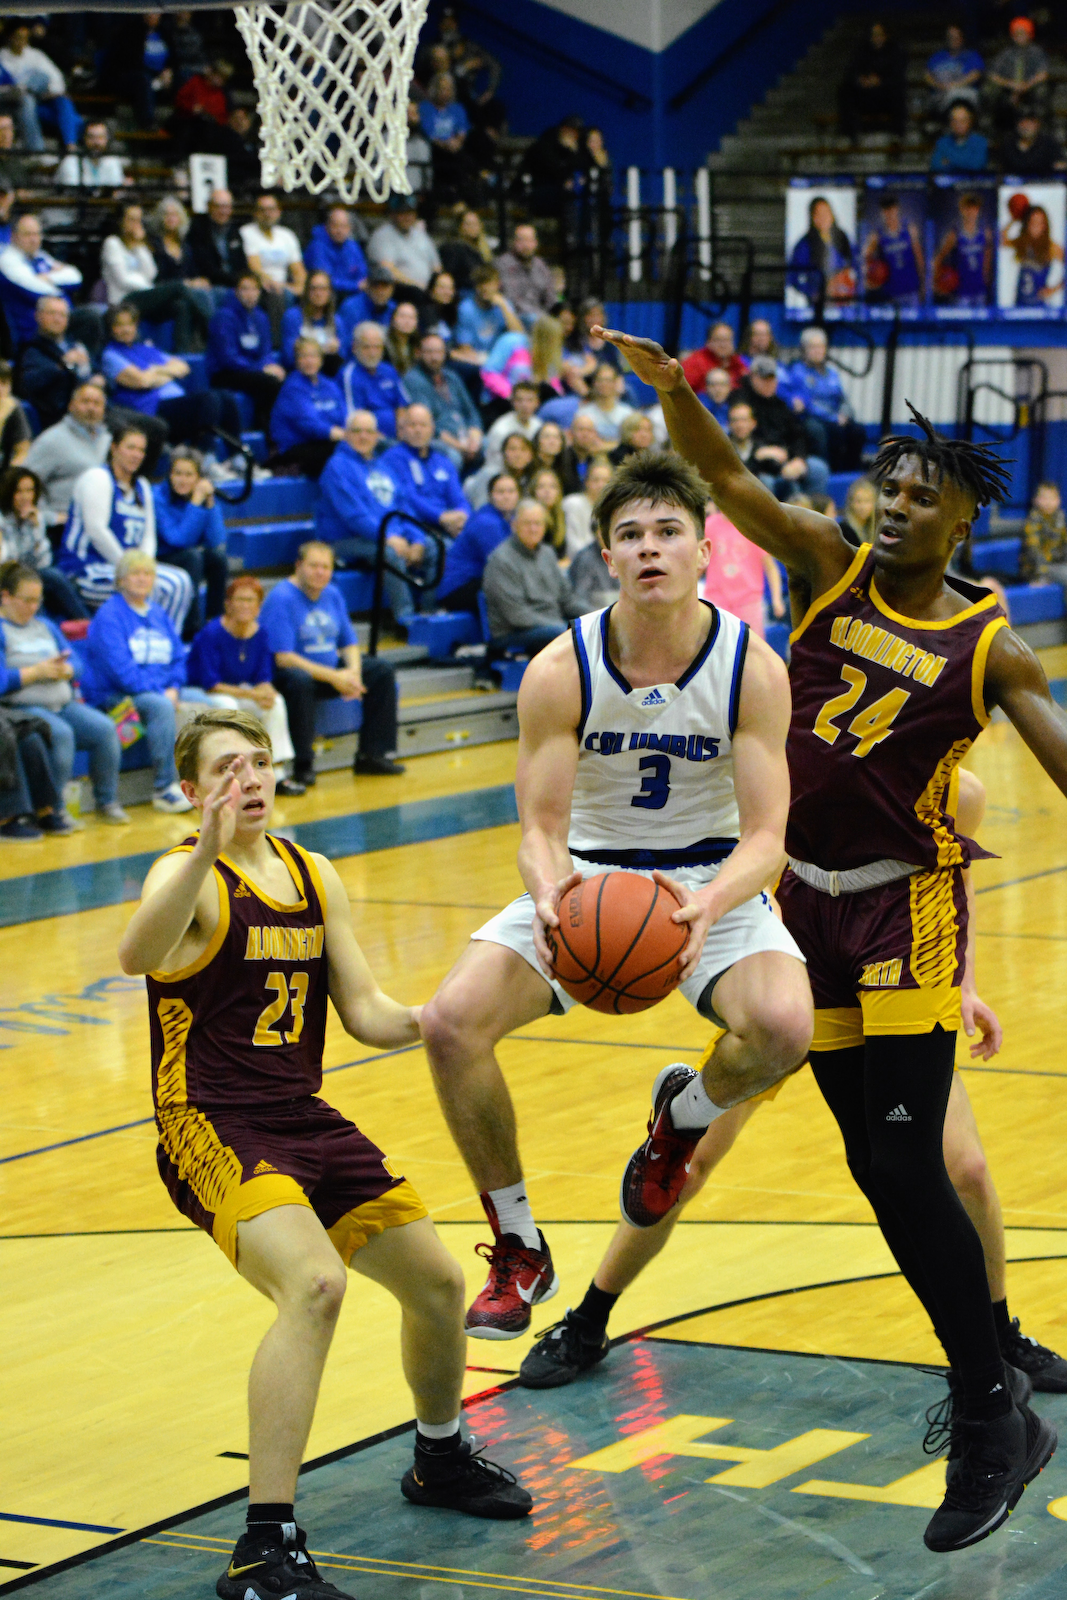 Dogs fall to Cougars 49-45 in boys basketball cover photo